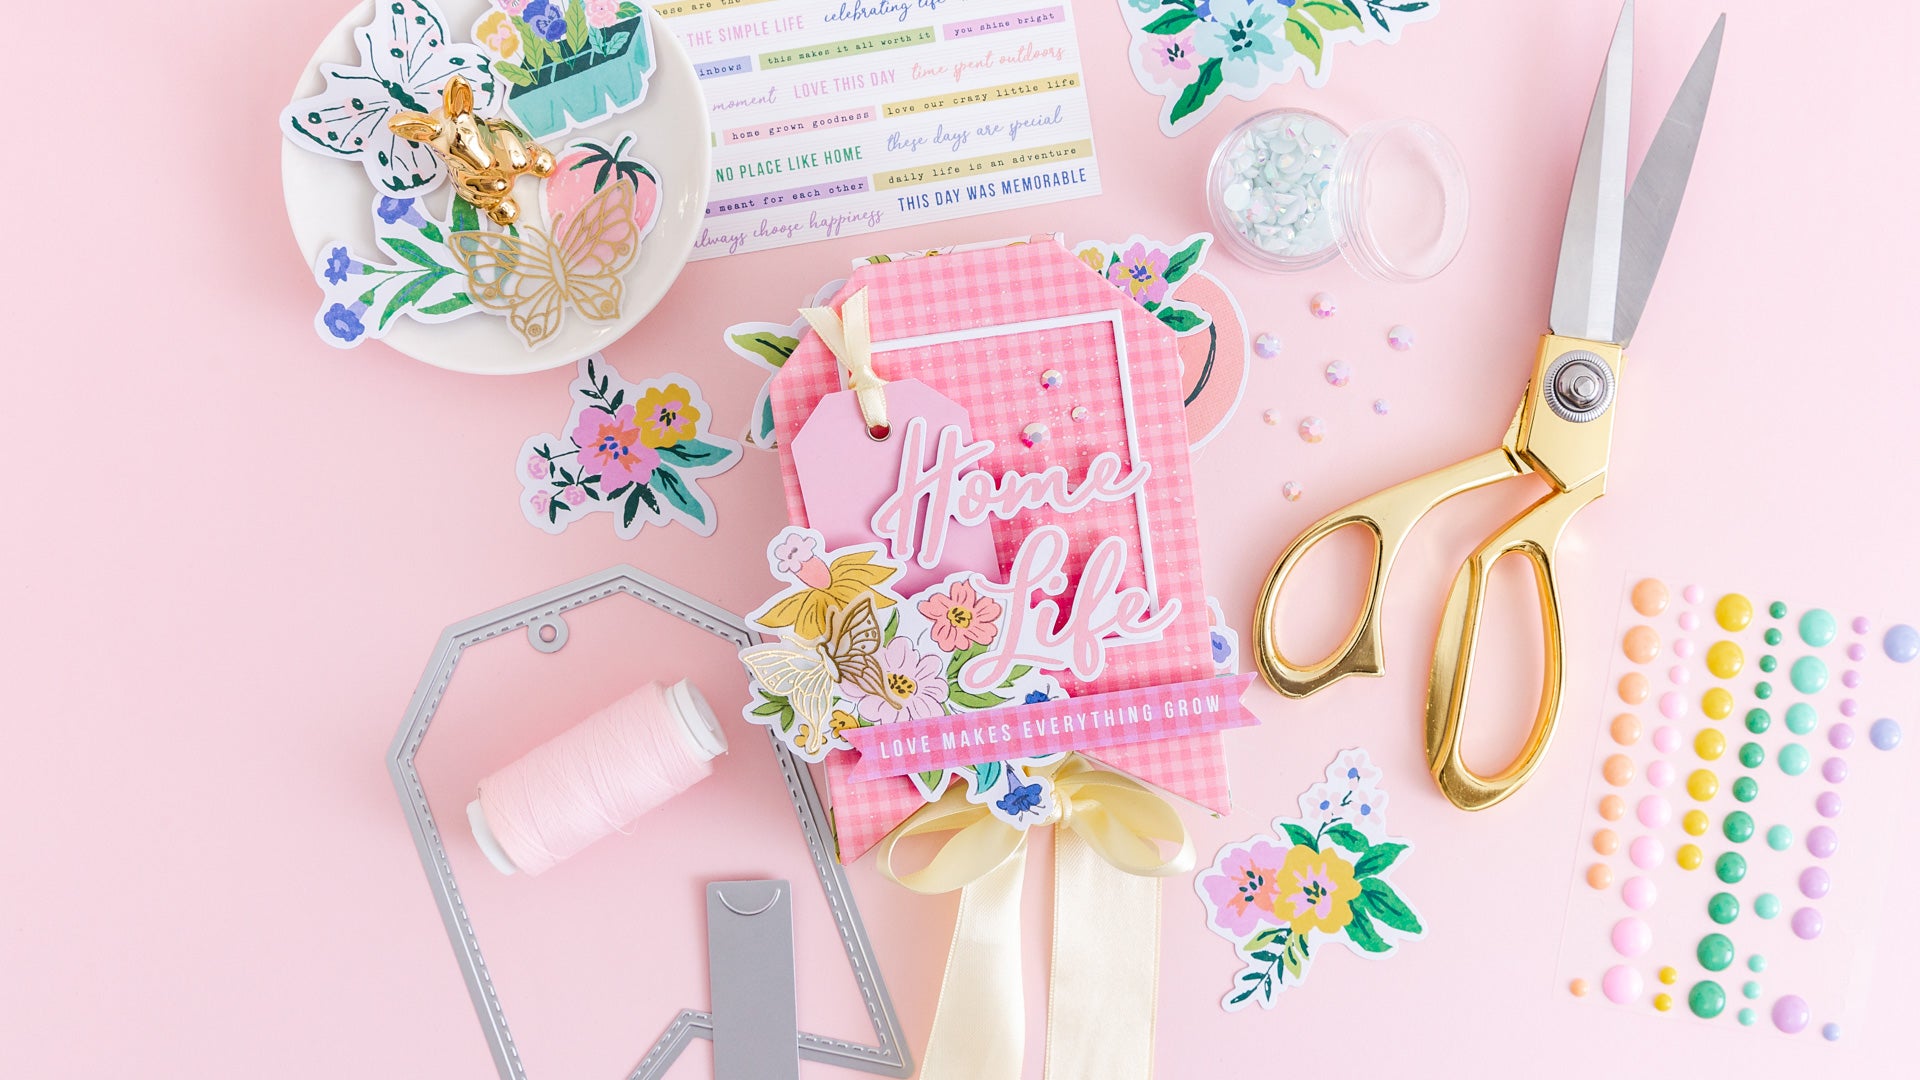 Home Life Tag Mini Album with Happy Blooms | Celes Gonzalo – Pinkfresh ...